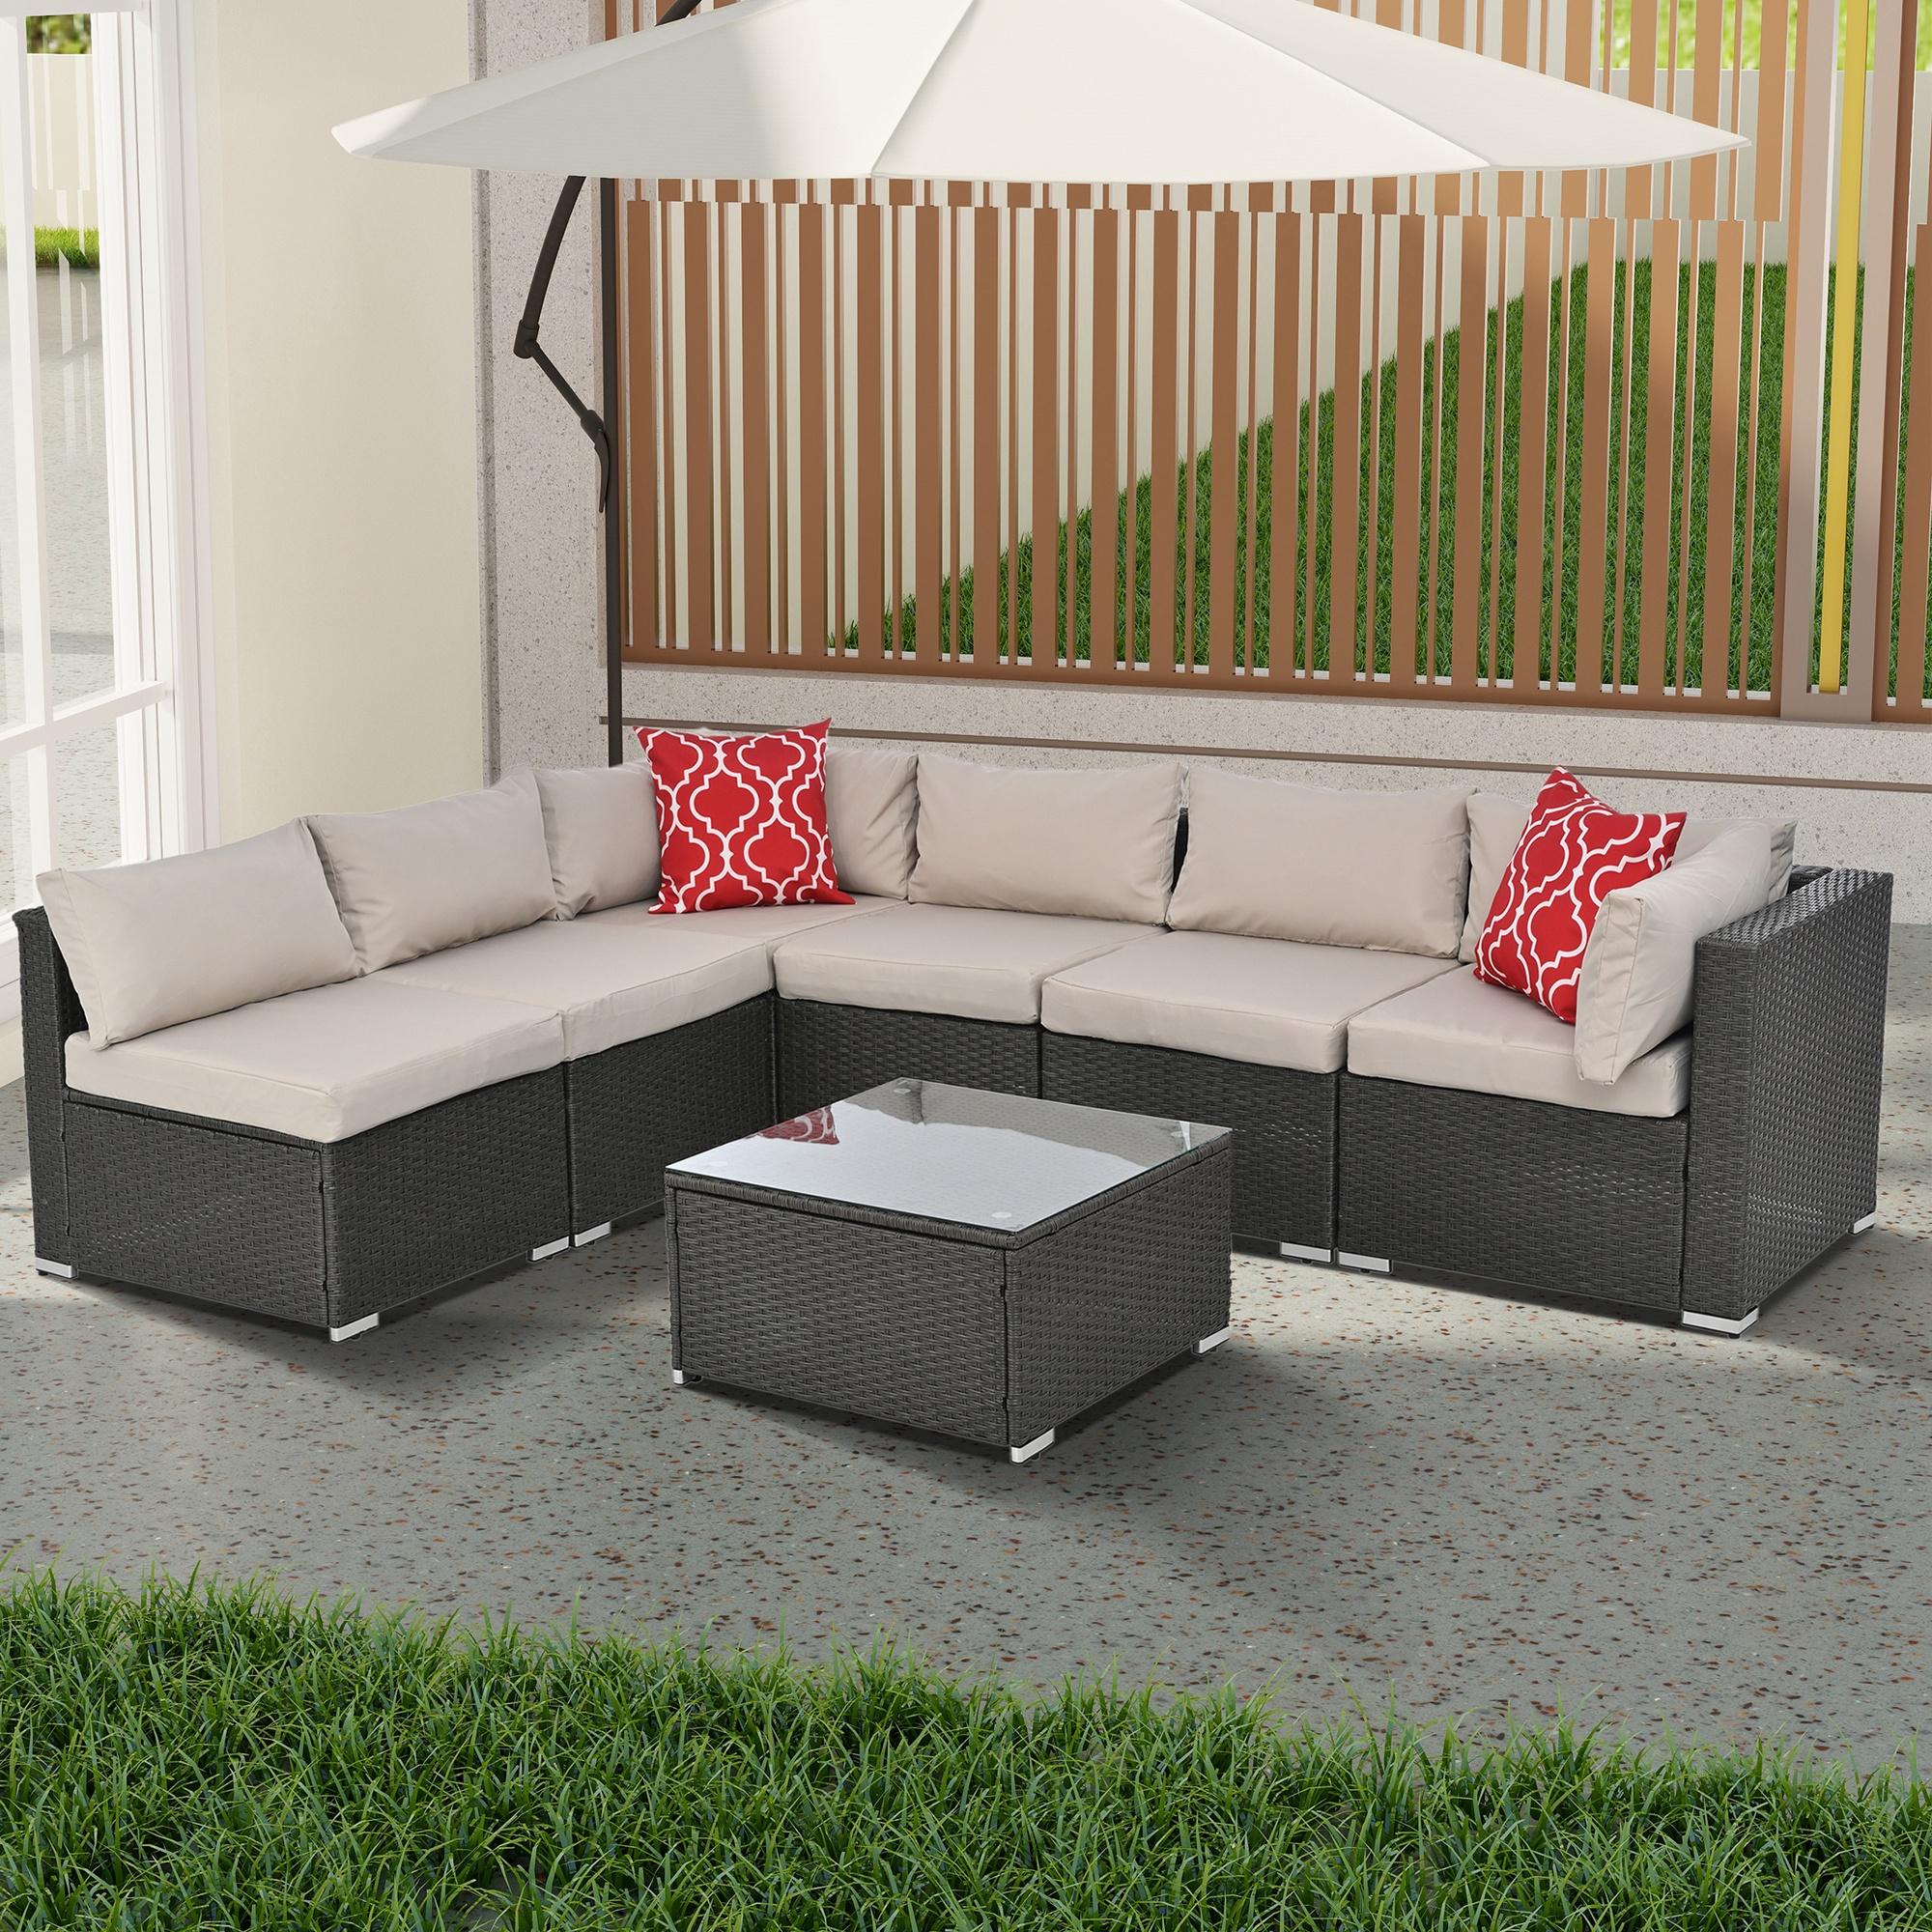 Wicker Patio Sofa Sets, 7 Pieces Outdoor Seating Sets, Lounge Sofa and Tempered Glass Coffee Table, Deck Front Garden Furniture Set, Gray Rattan + Beige Cushion - image 1 of 10